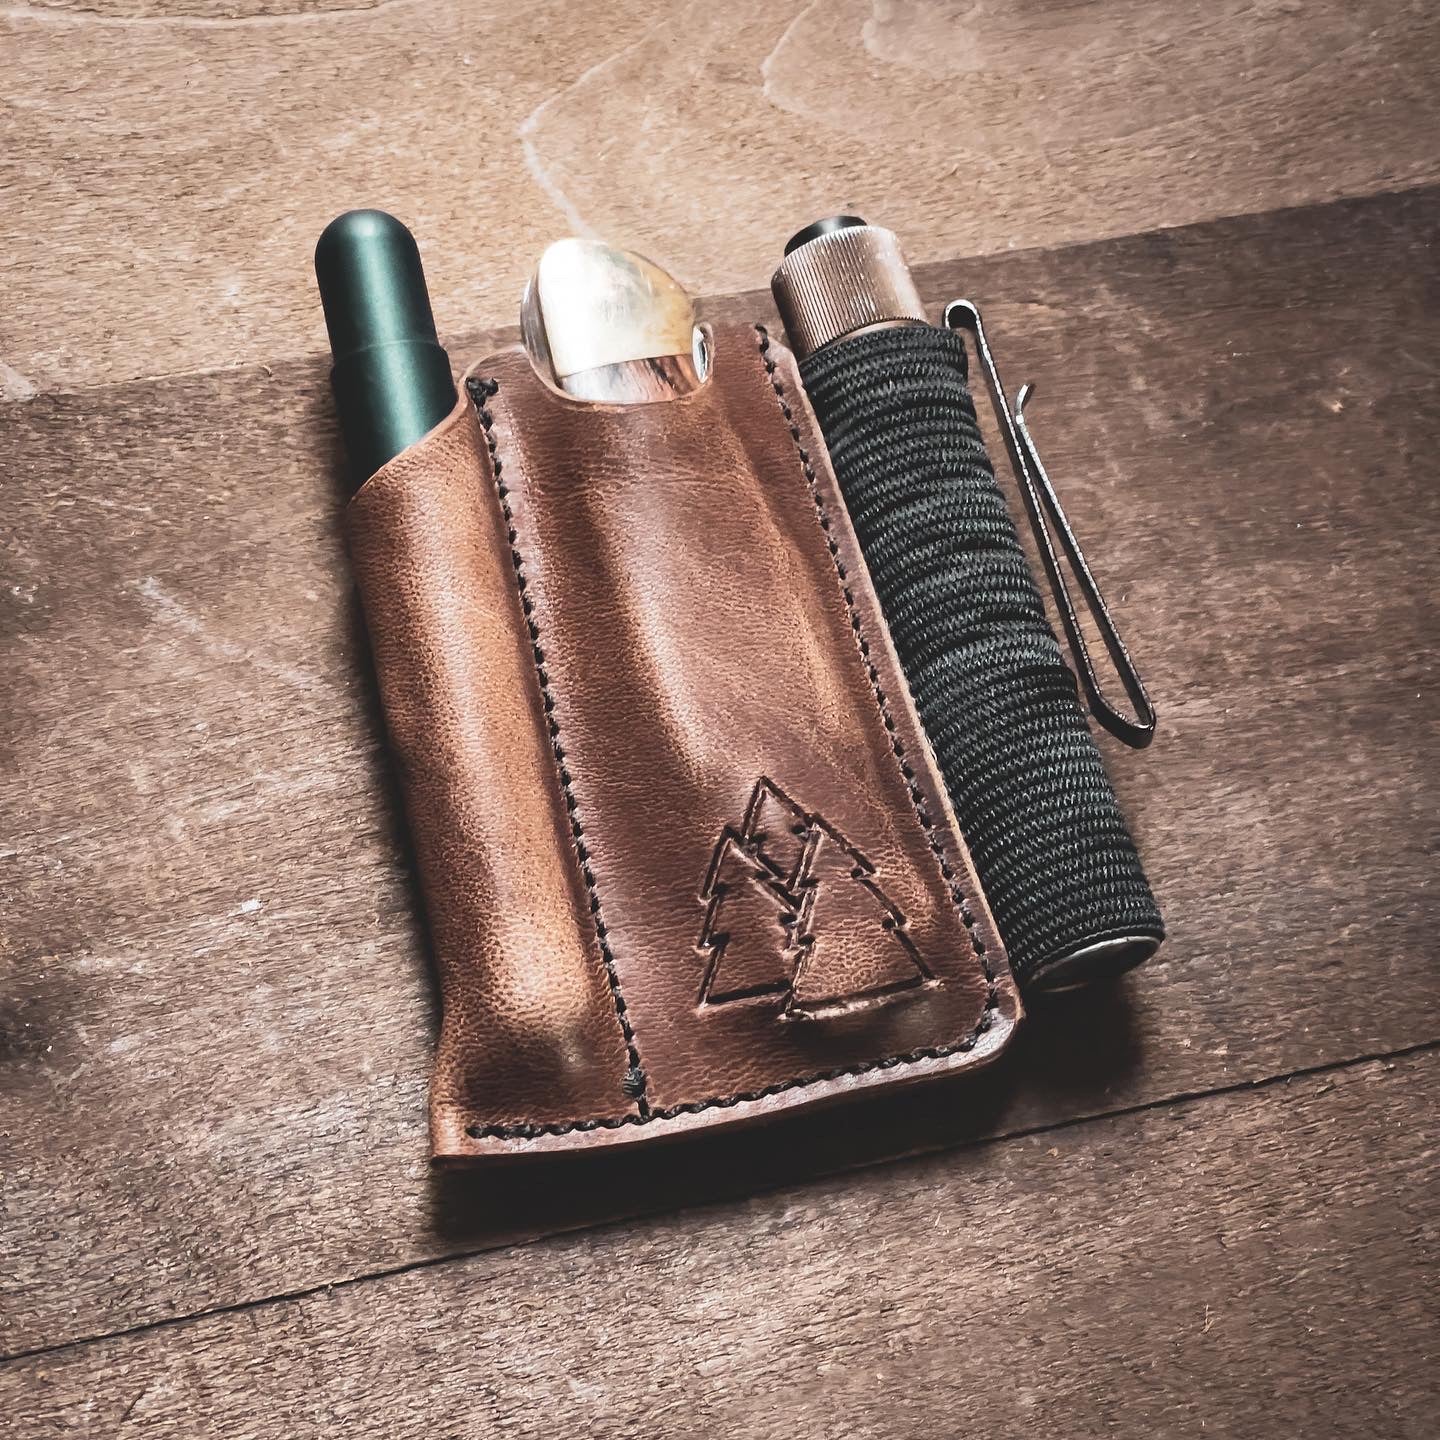  EDC Leather Pocket Organizer, Pocket Slip, Pocket Knife Pouch,  EDC Carrier, with Pen Loop, Everyday Carry Organizers, Full Grain Leather.  Chestnut. : Everything Else